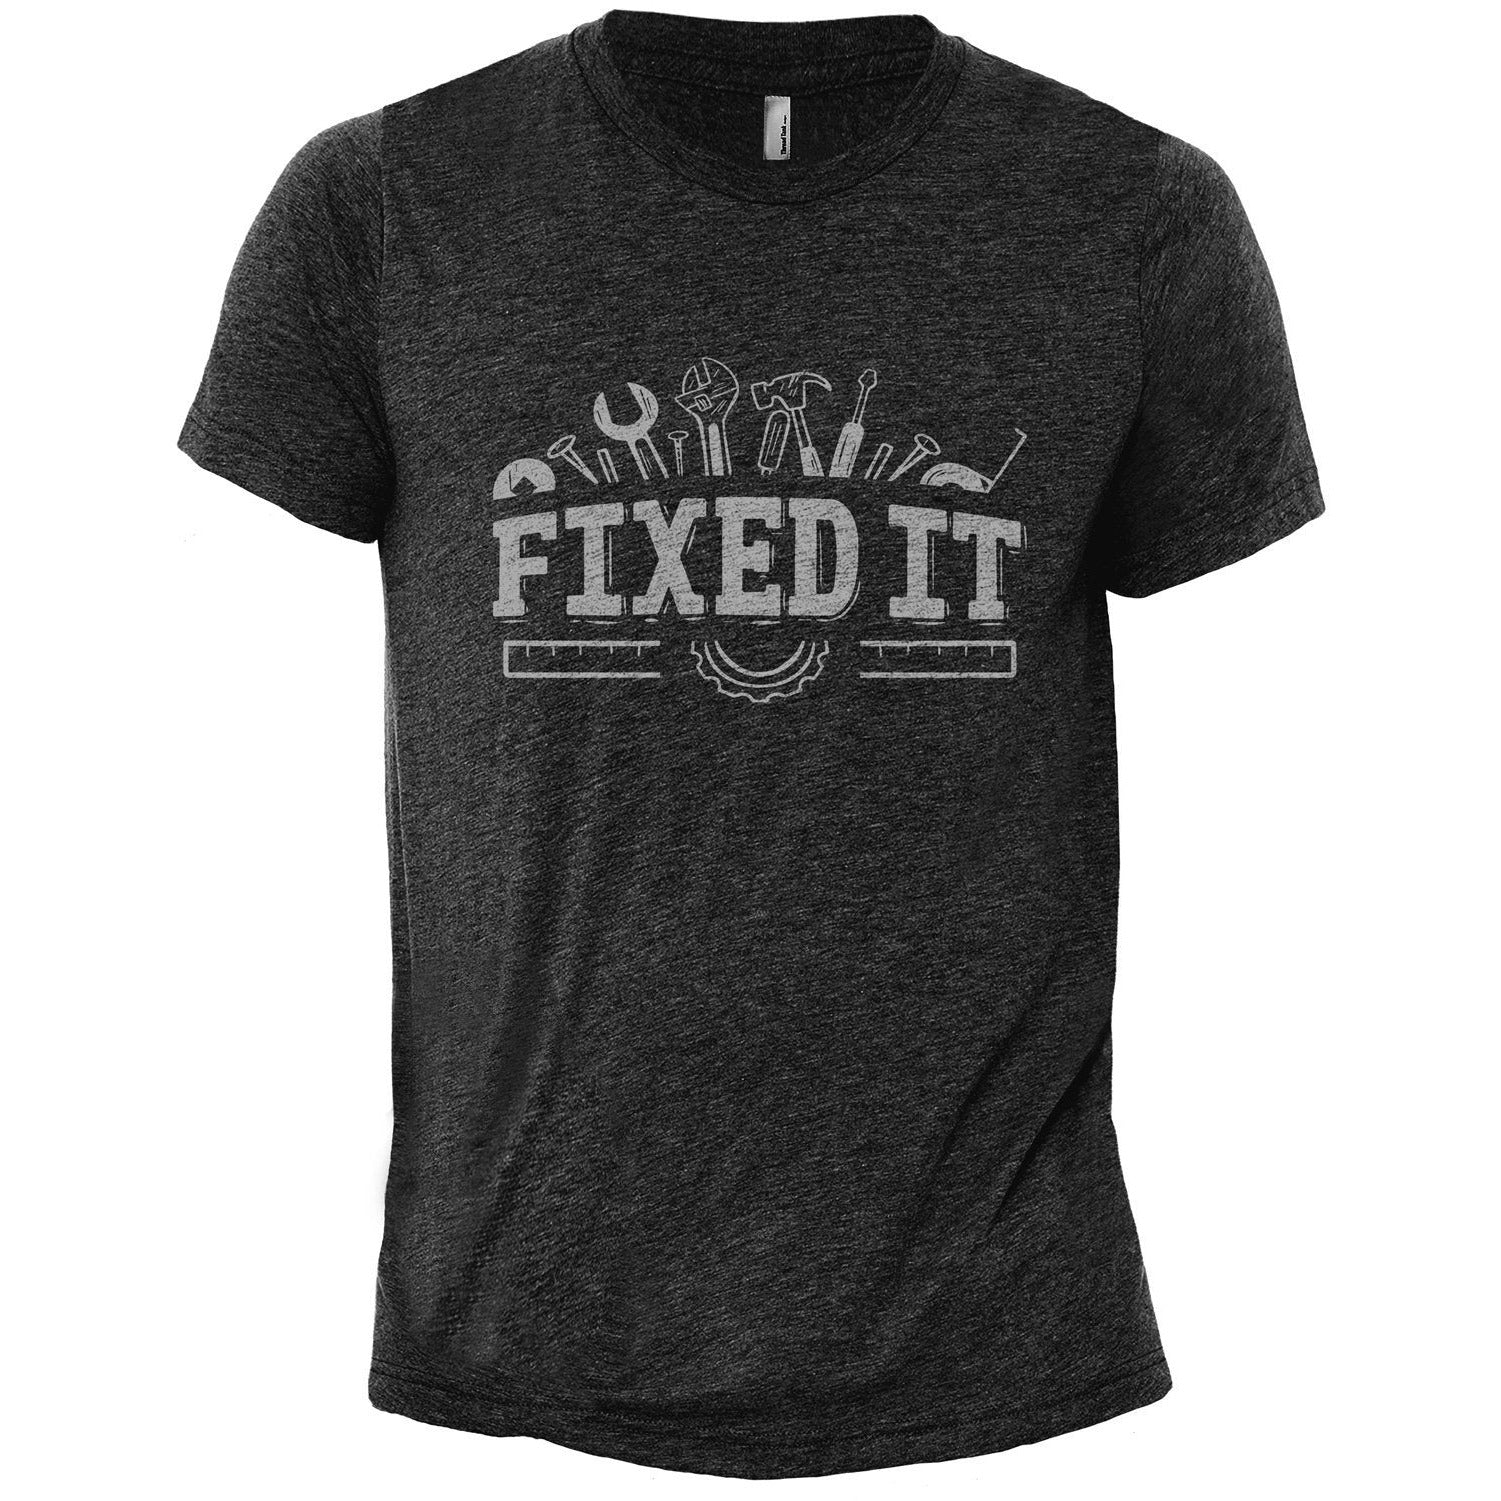 Fixed It Charcoal Printed Graphic Men's Crew T-Shirt Tee